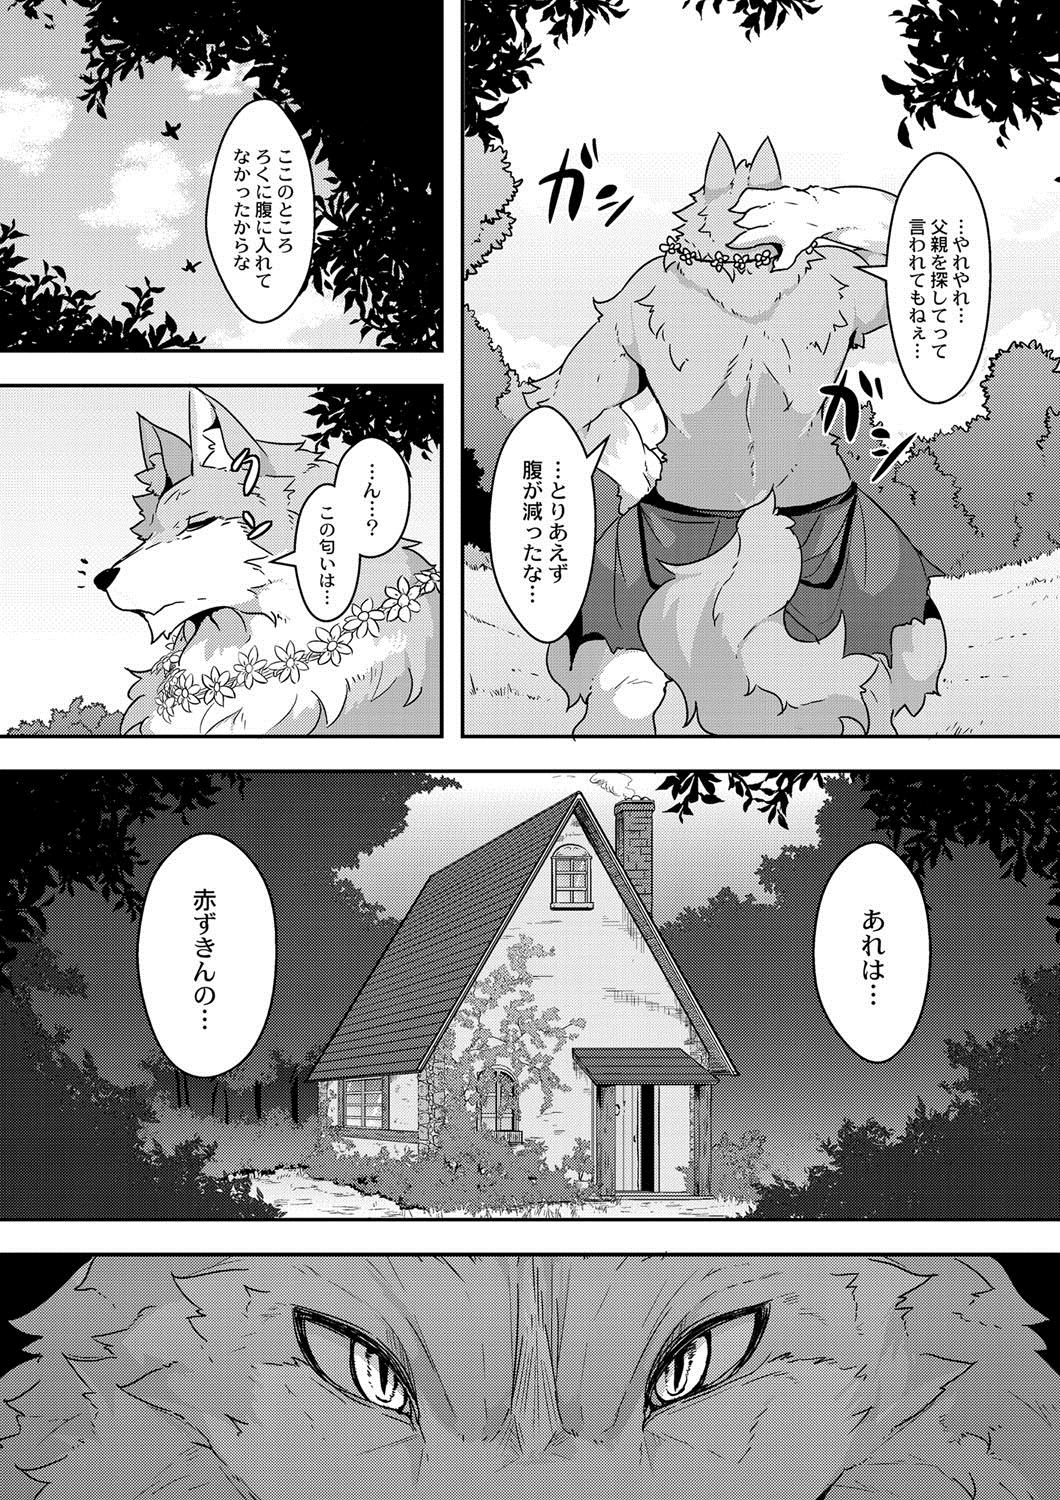 Roughsex Red Riding Hood Collection - Dragon ball gt Abg - Page 3